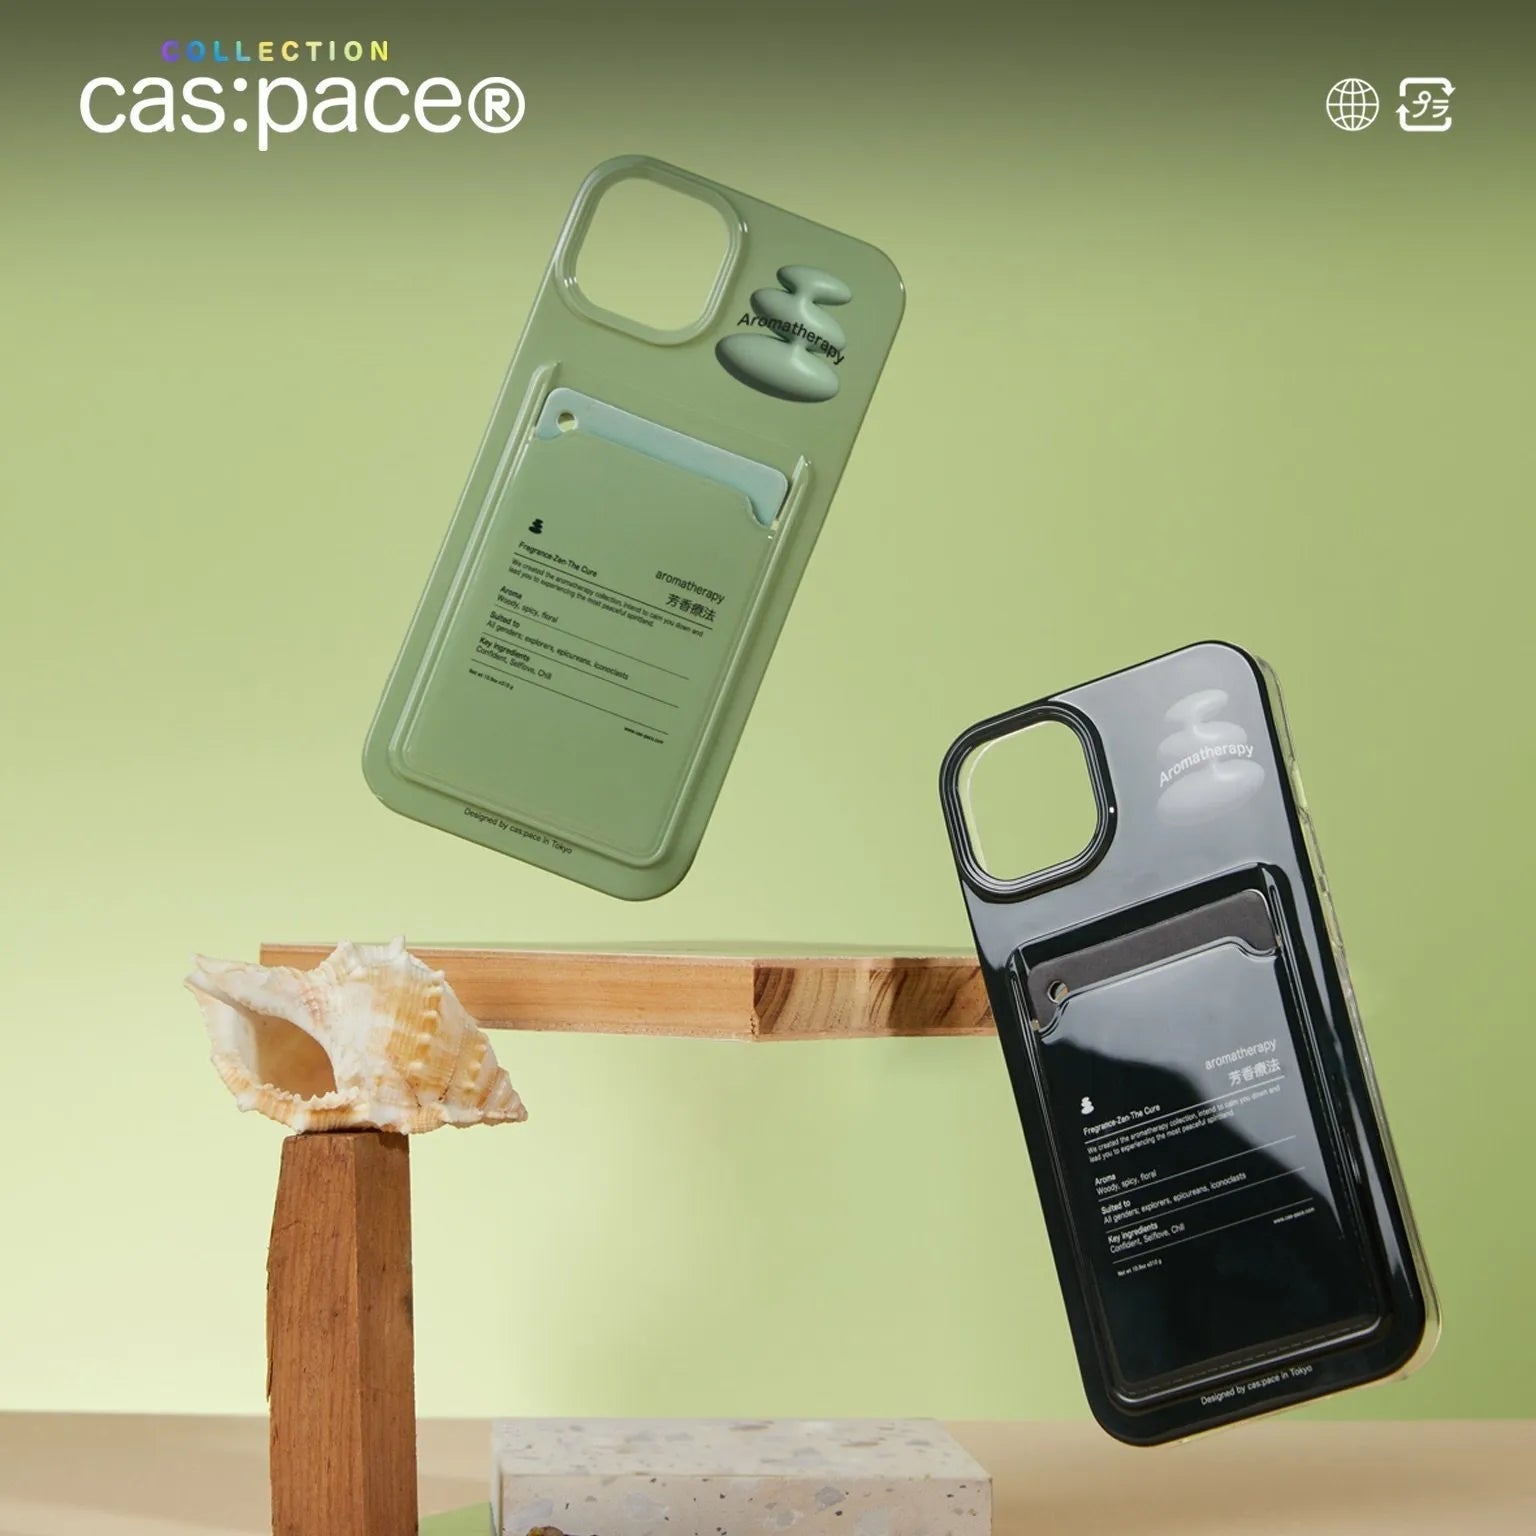 cas:pace collection 「アロマテラピー」携帯ケース（green) - cas:pace 殼空間